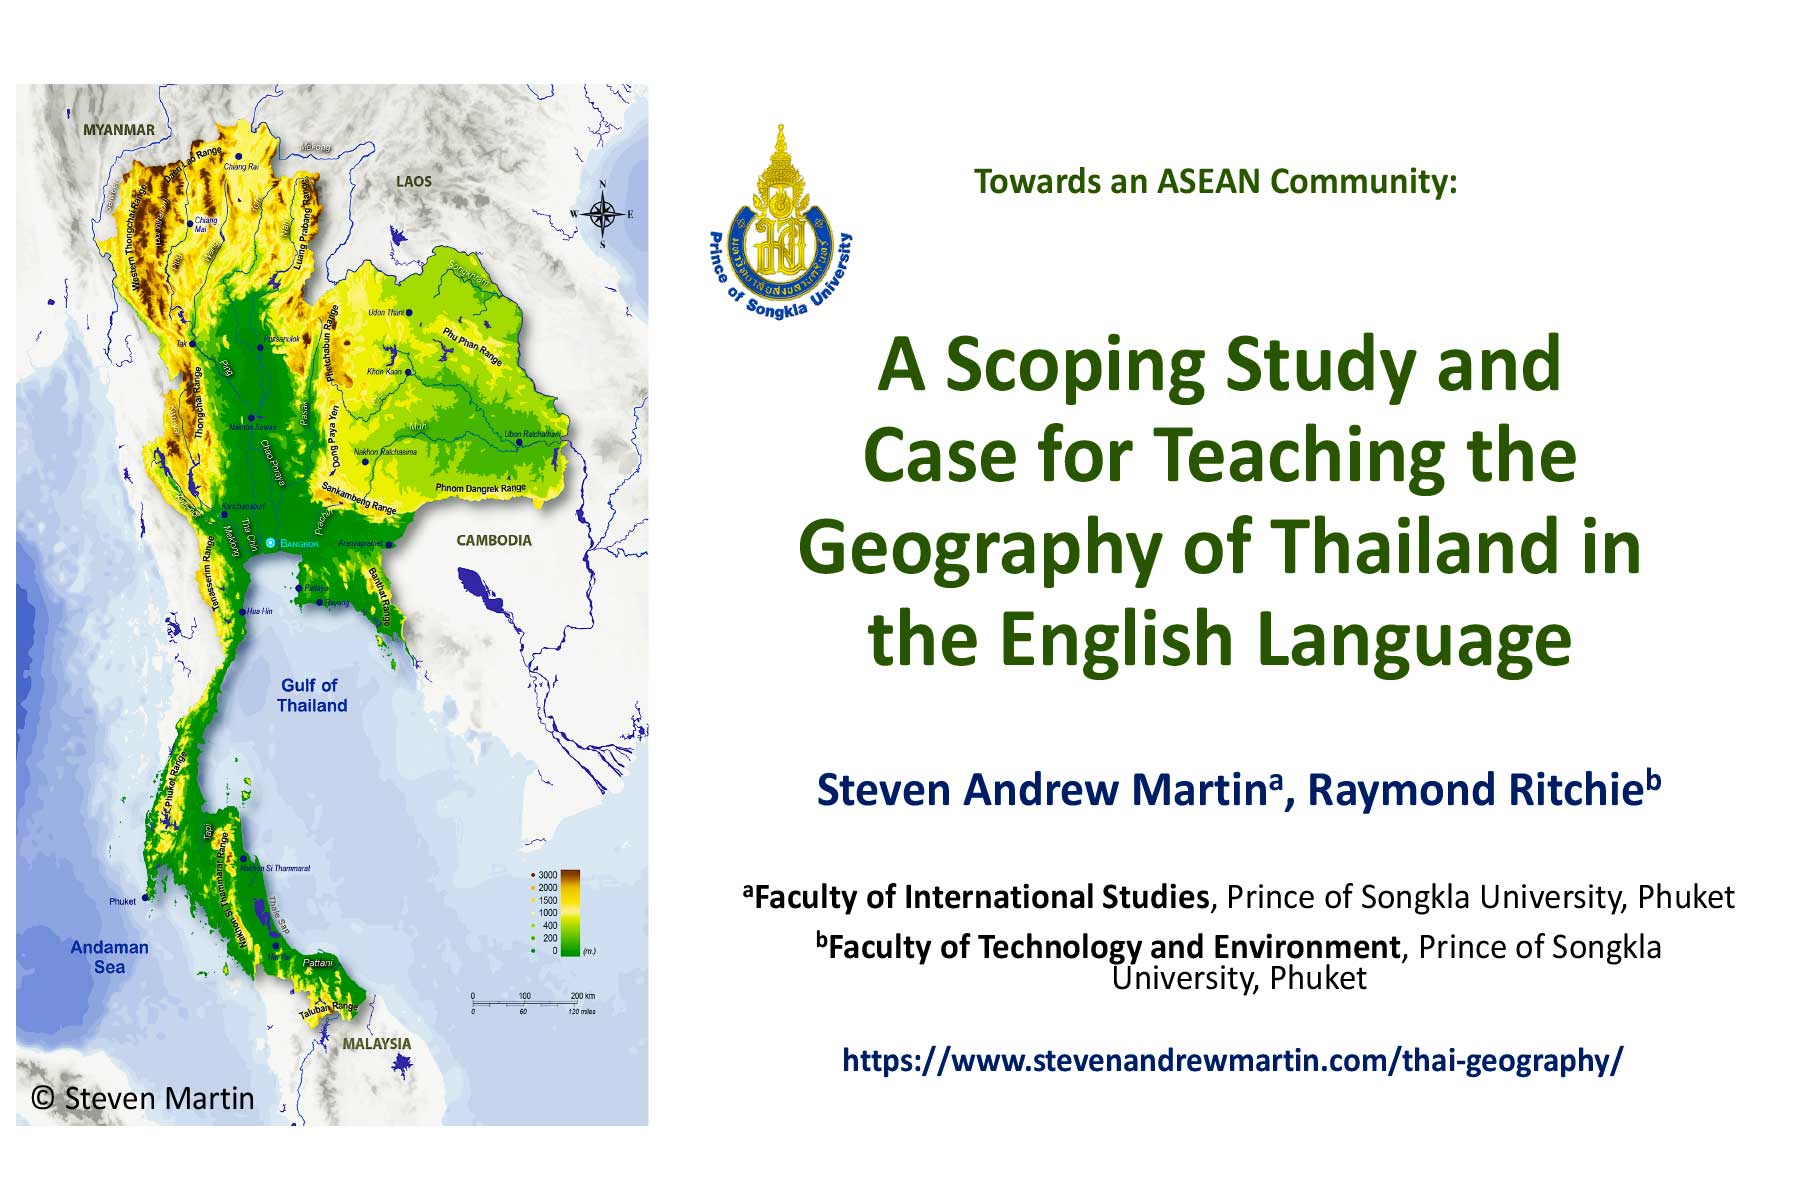 Martin, S. A., & Ritchie, R. (2018).Towards an ASEAN community: A scoping study and case for teaching the geography of Thailand in the English language.